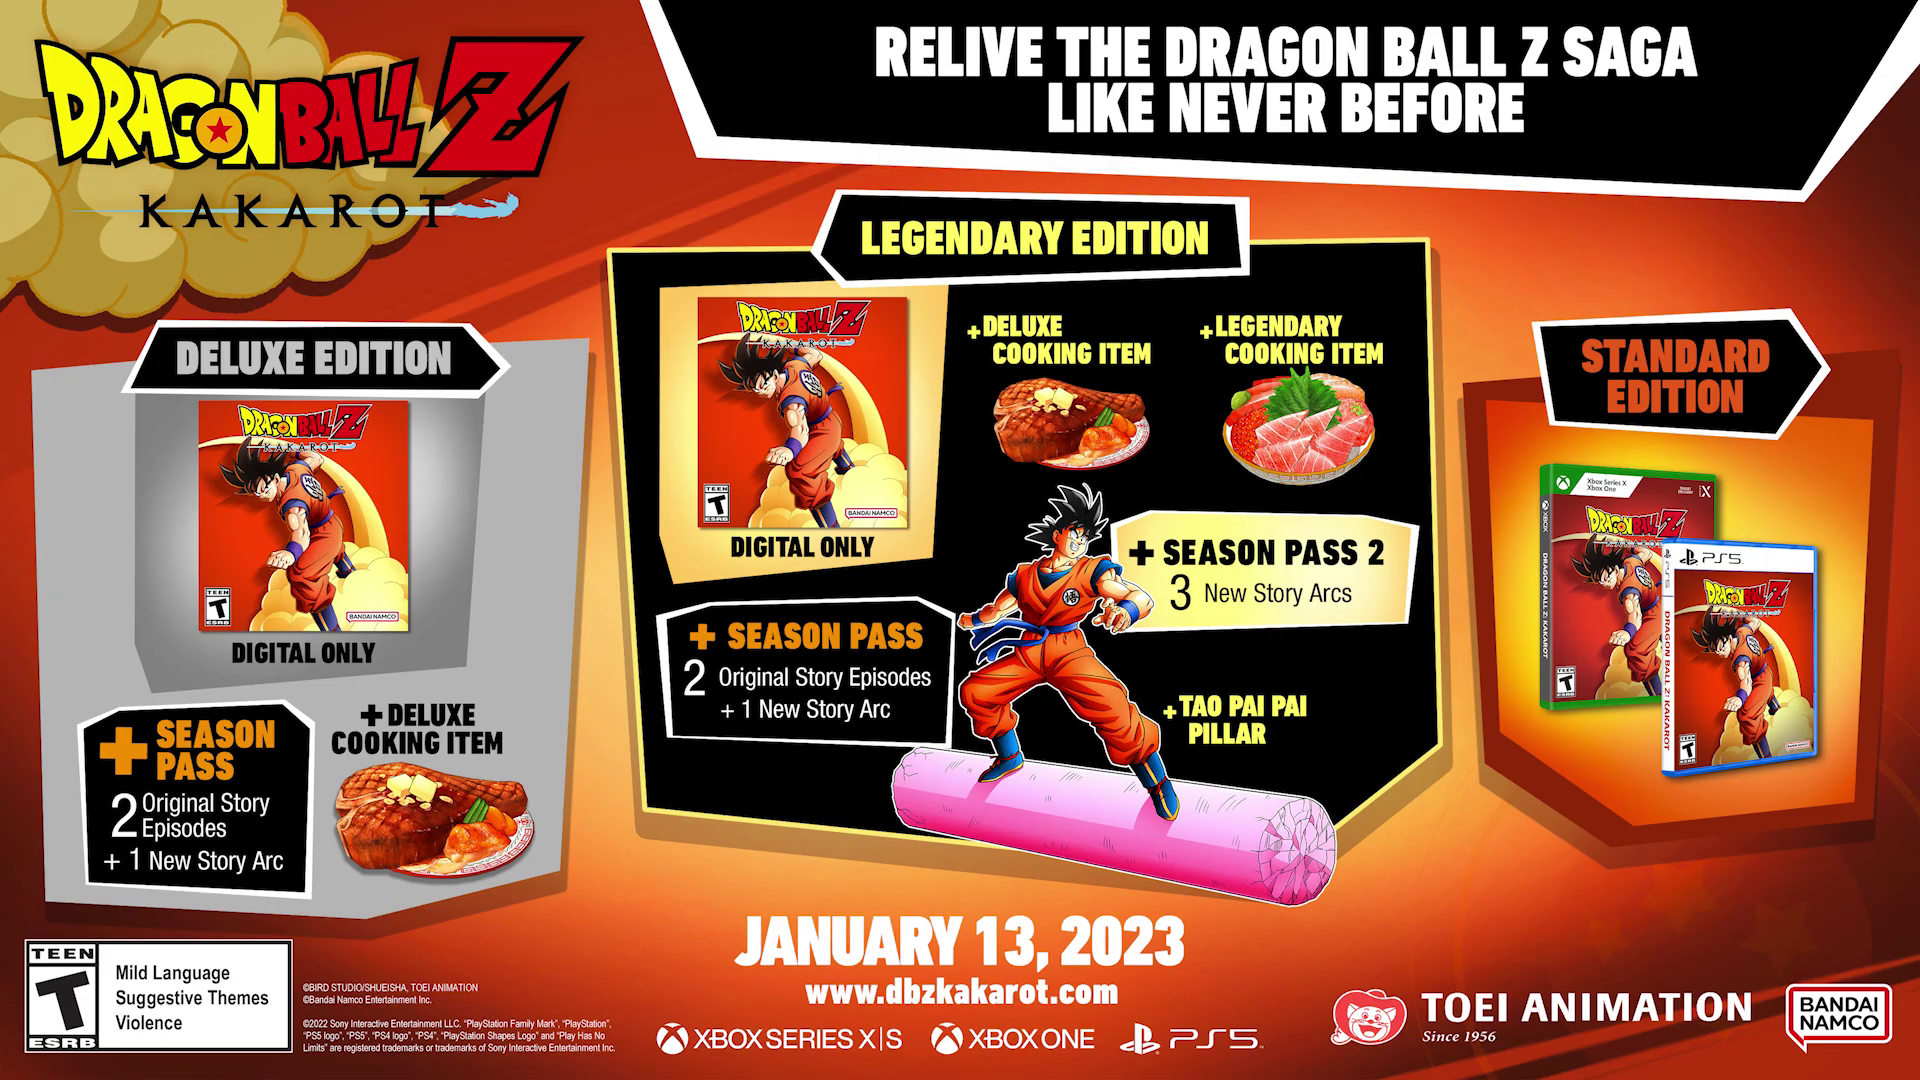 Dragon Ball Z: Kakarot coming to PS5 and Xbox Series X/S next year